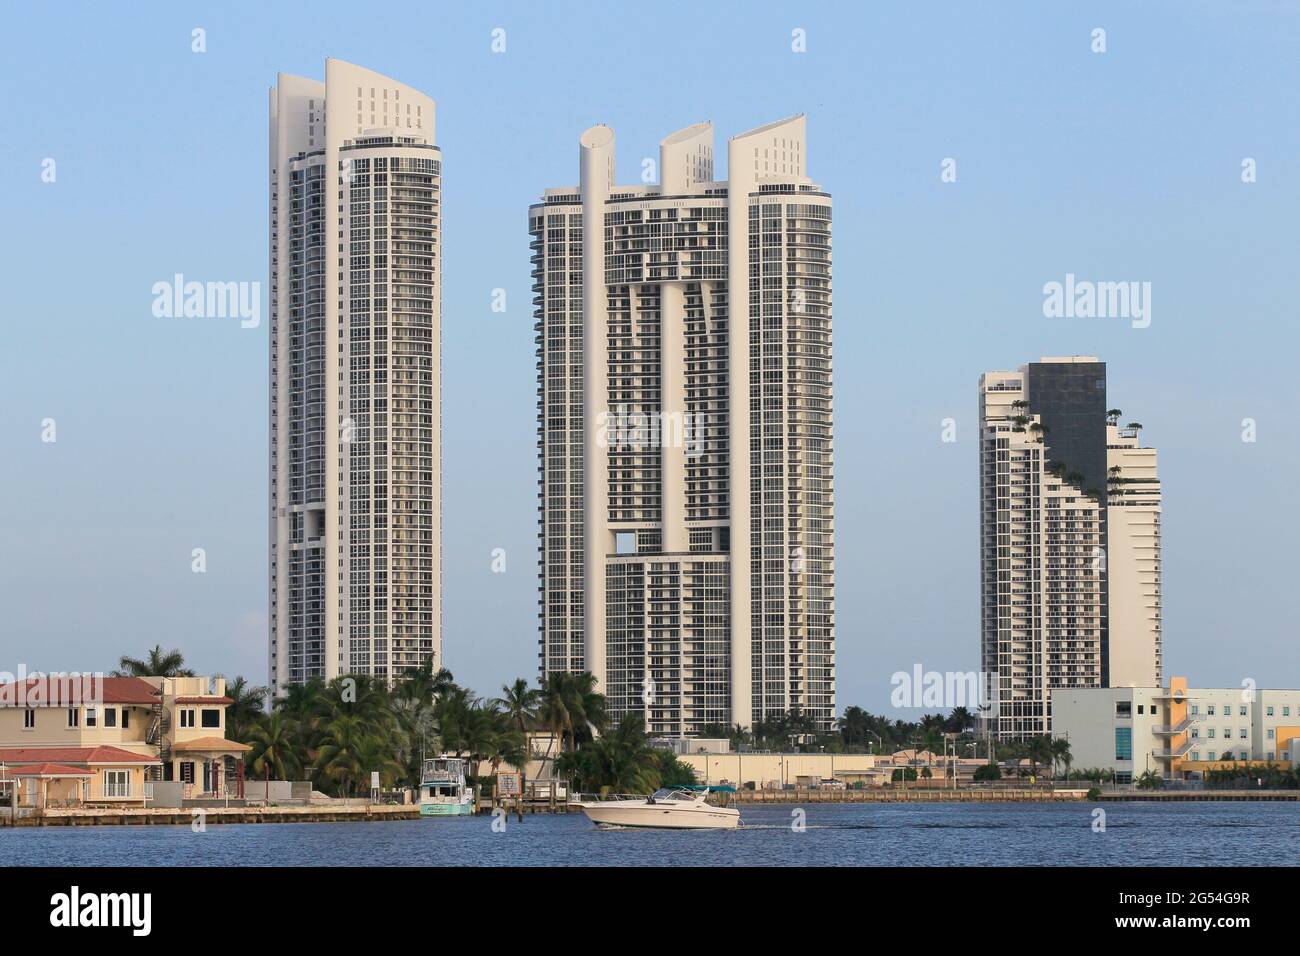 Sunny Isles, Miami.FL.USA. Resorts building and skyscraper, are seen in front of Sunny Isles waterway. Photo By: Jose Isaac Bula Stock Photo